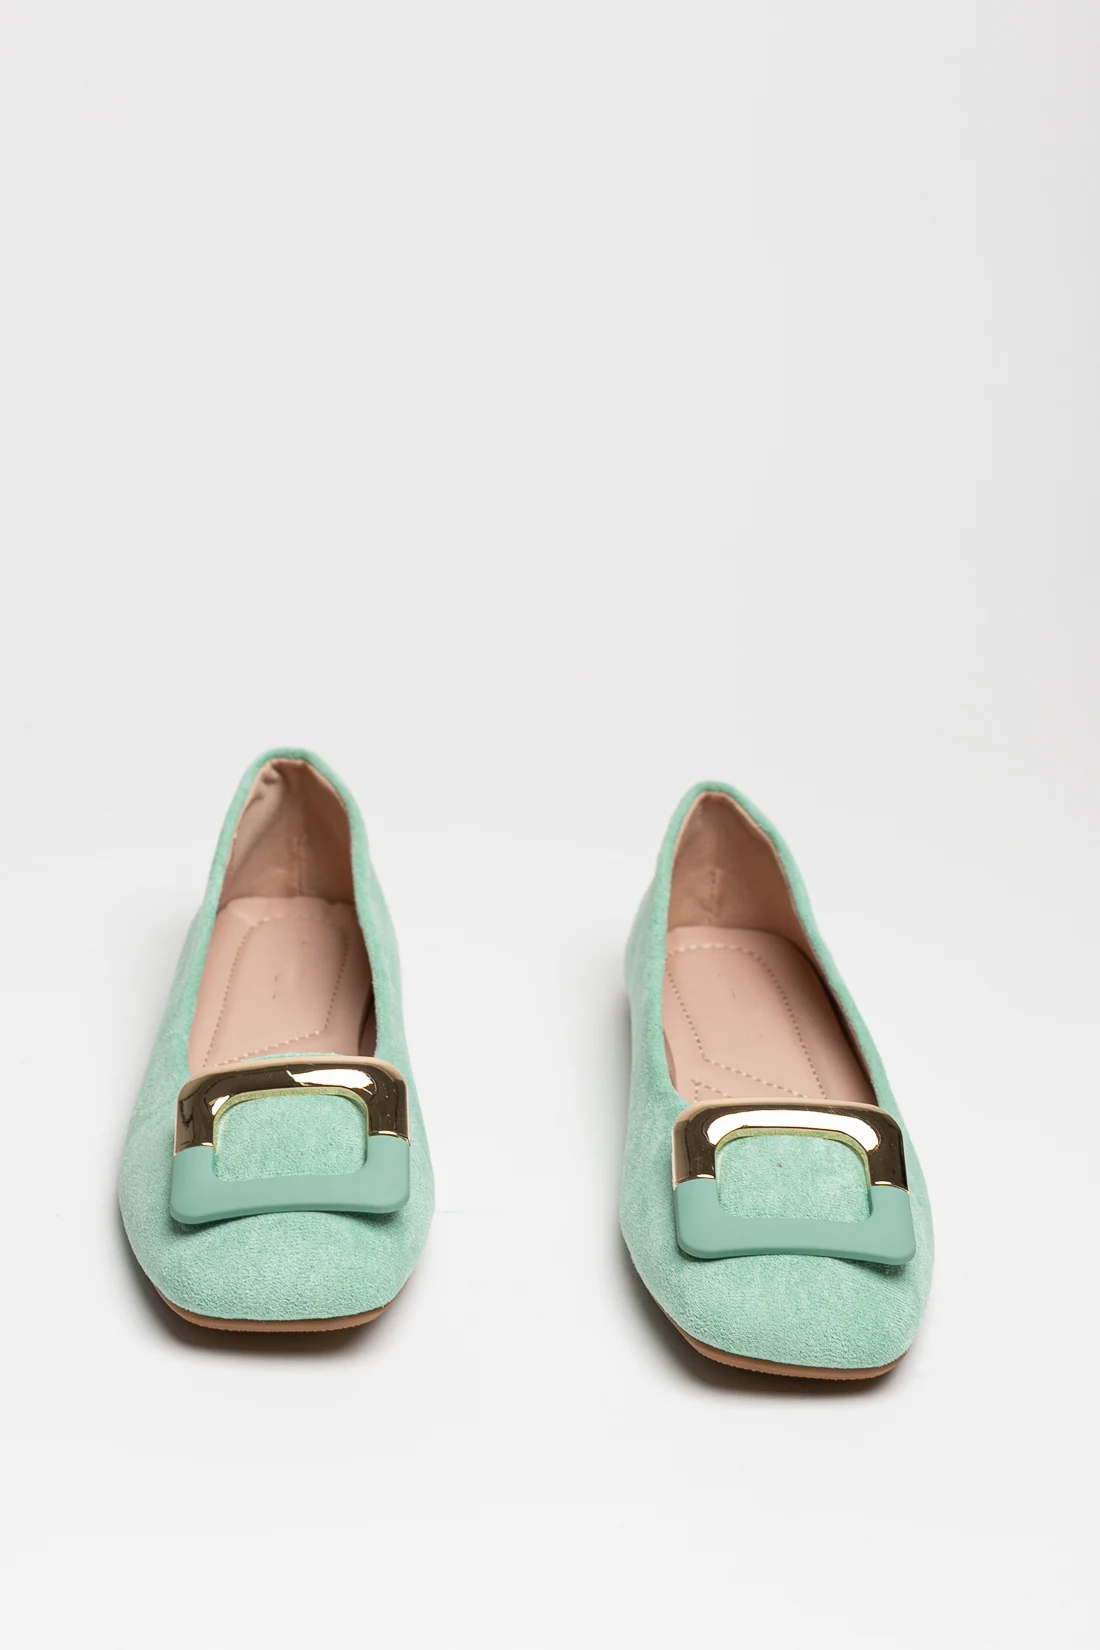 AMELY FLAT SHOES - GREEN